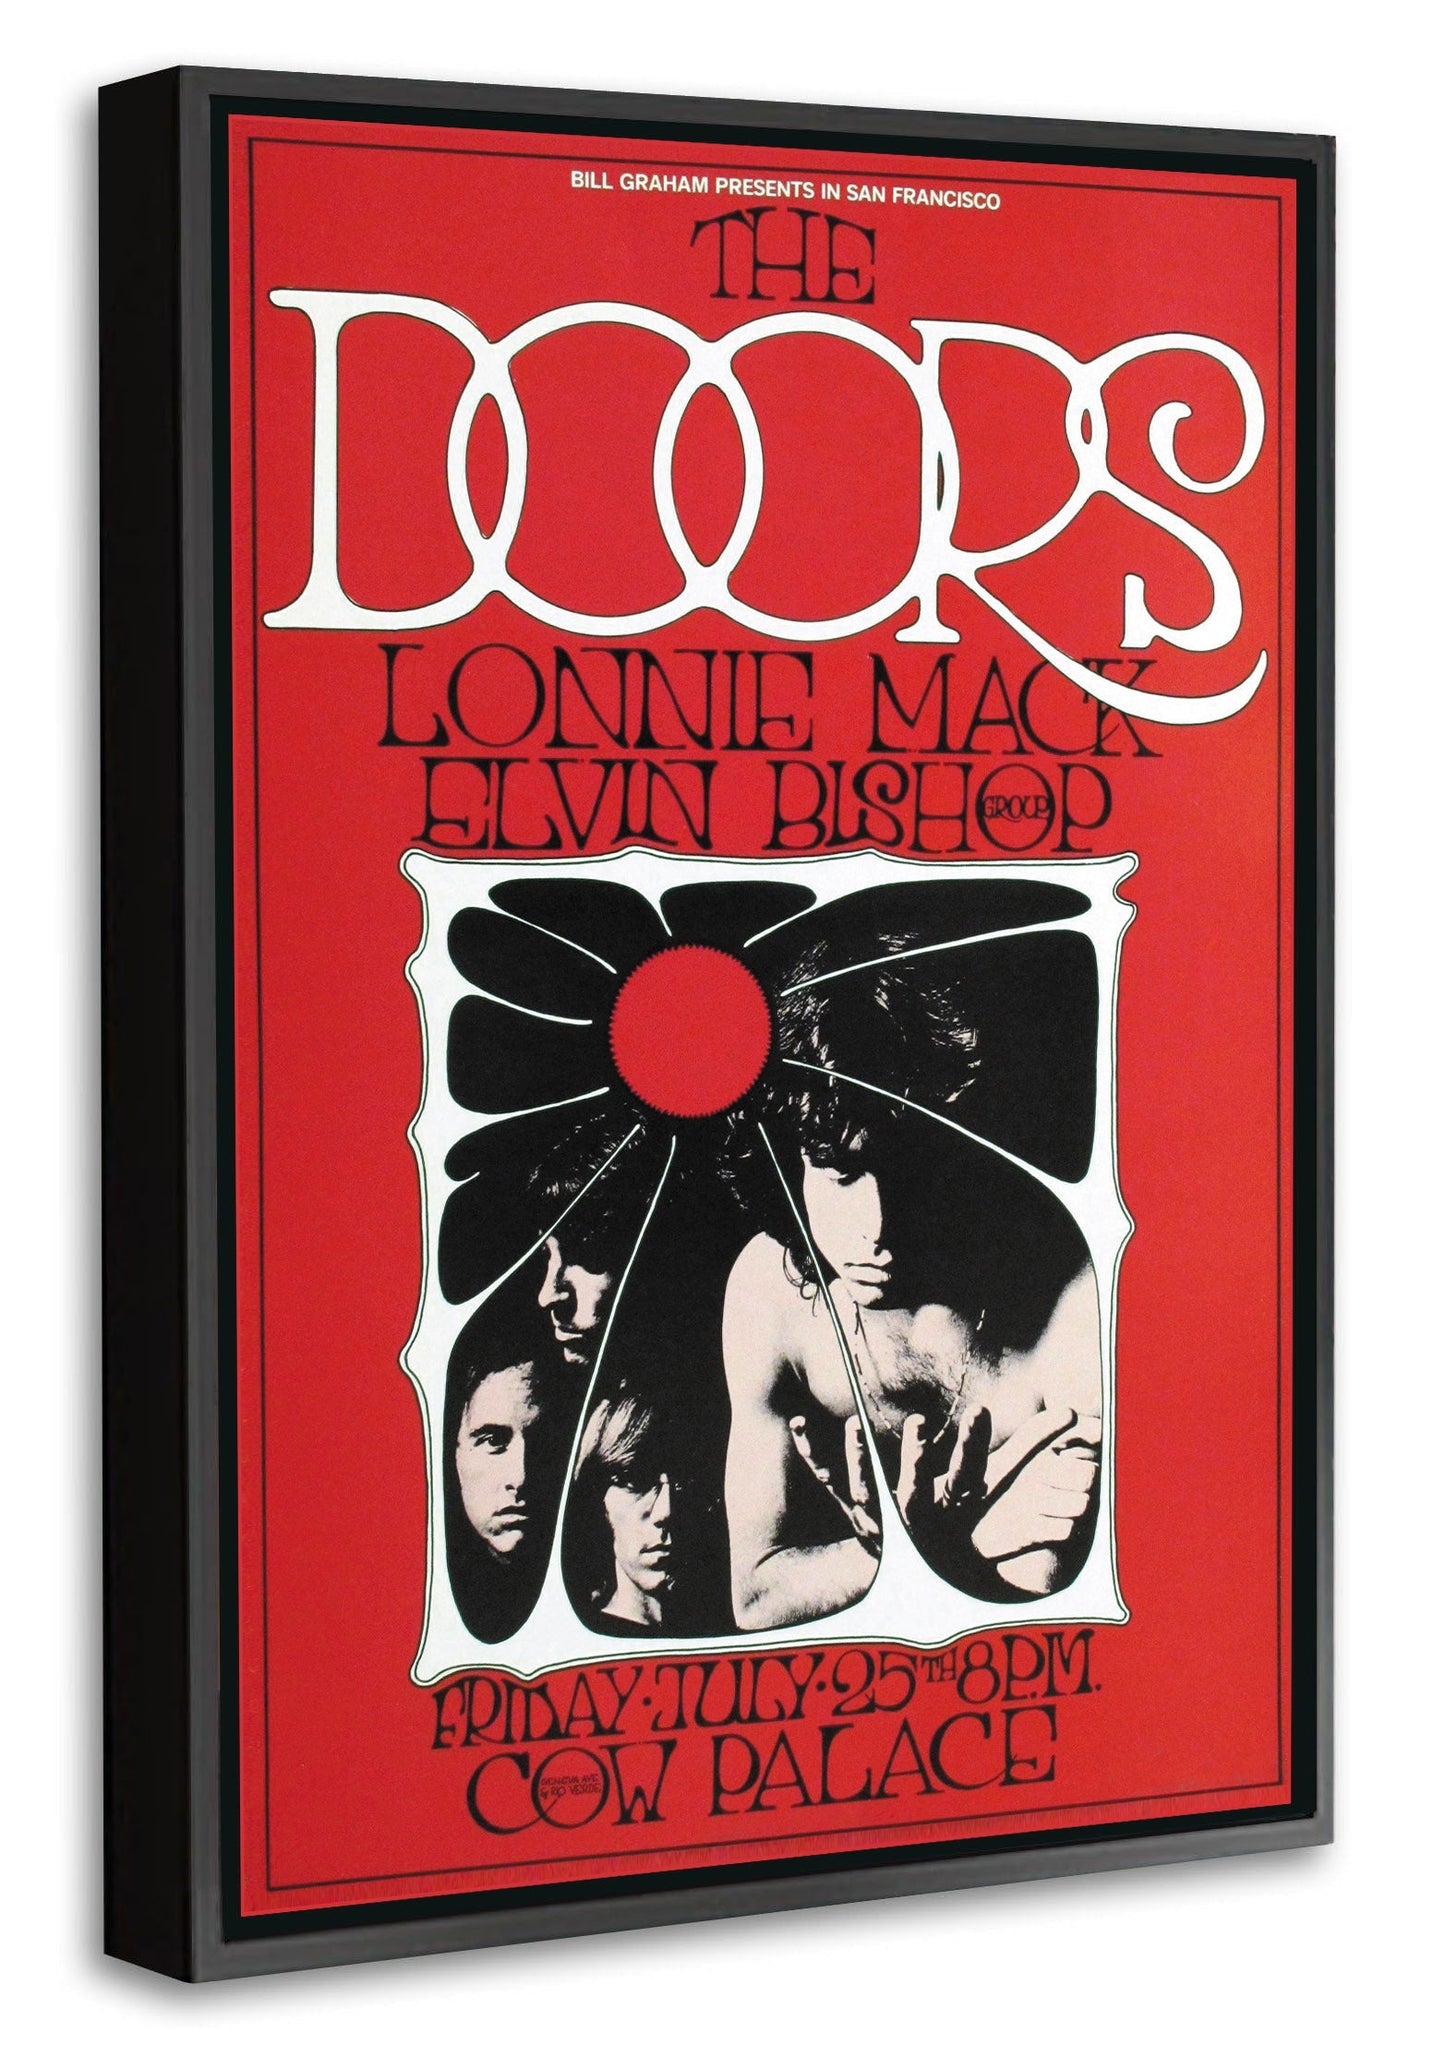 The Doors – Cow Palace-concerts, print-Canvas Print with Box Frame-40 x 60 cm-BLUE SHAKER